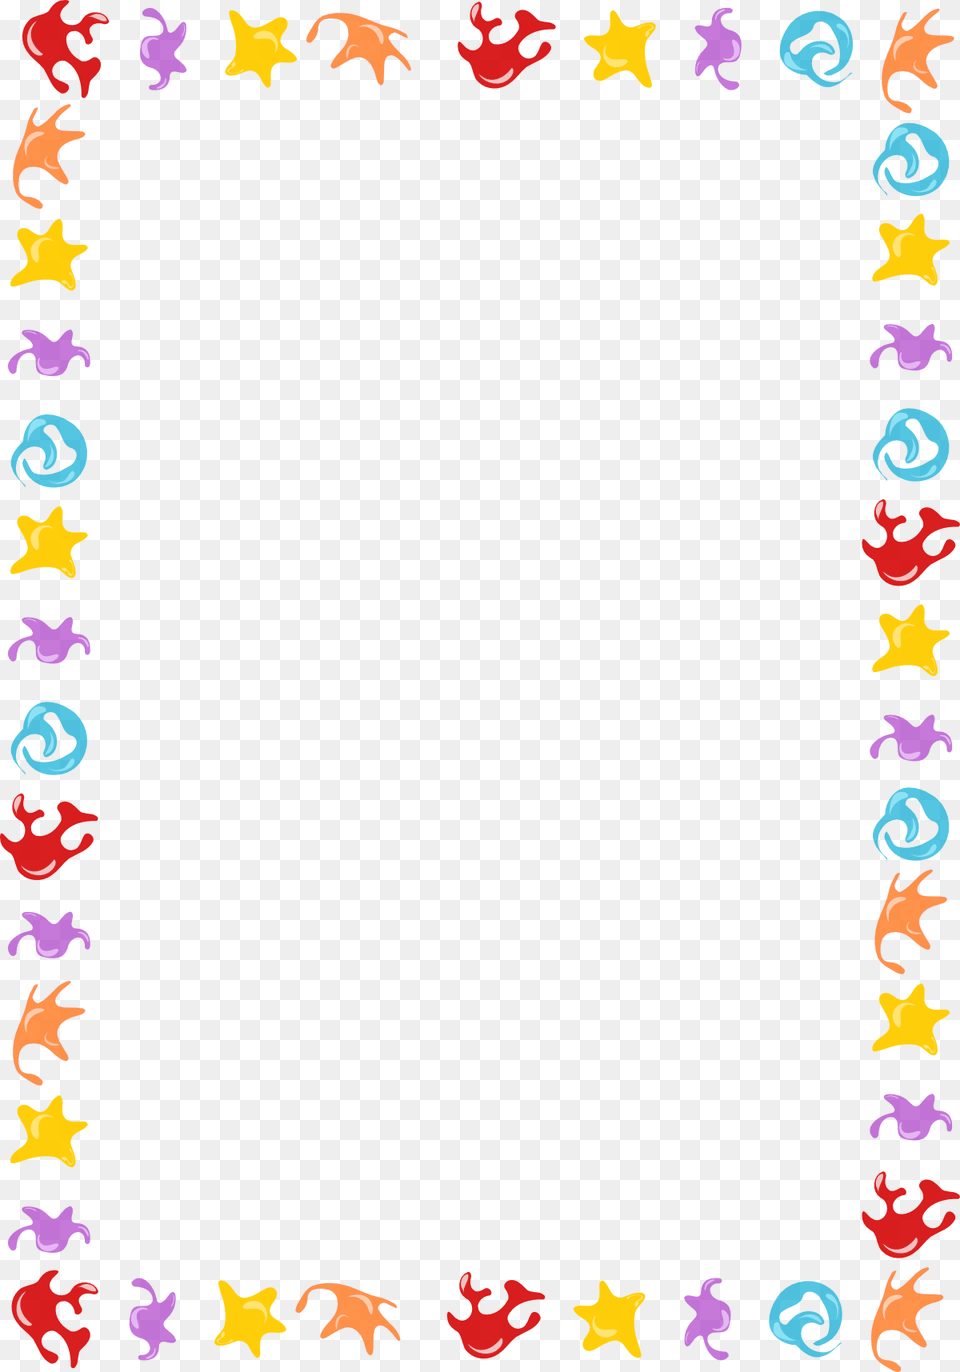 Abstract Border 2 Vector 7039s Theme Border, Paper, Art, Floral Design, Graphics Free Transparent Png